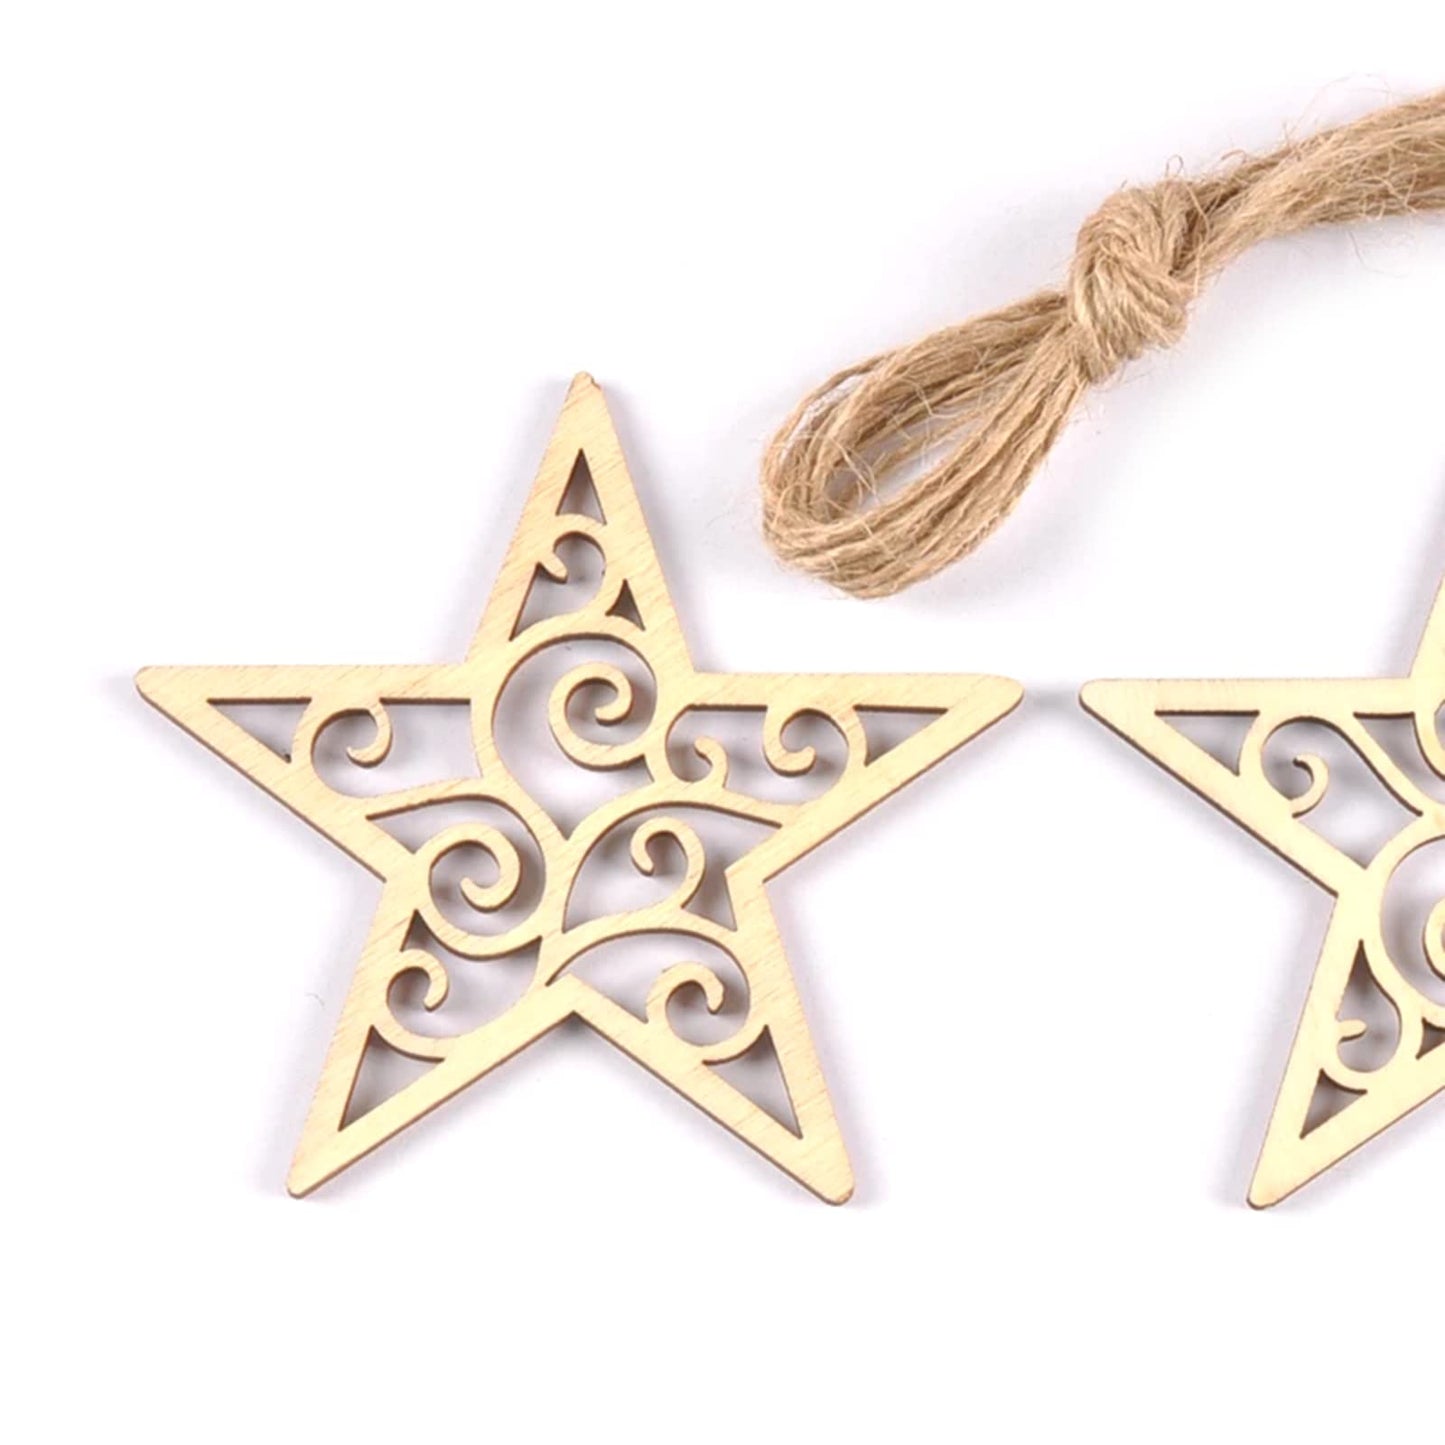 BUZHI 10 Pcs Wooden Moon Star Ornaments,Unfinished Moon Star Heart Shape Hollow Wooden Chips Wood Slices for DIY Eid Ornament Hanging Pendant